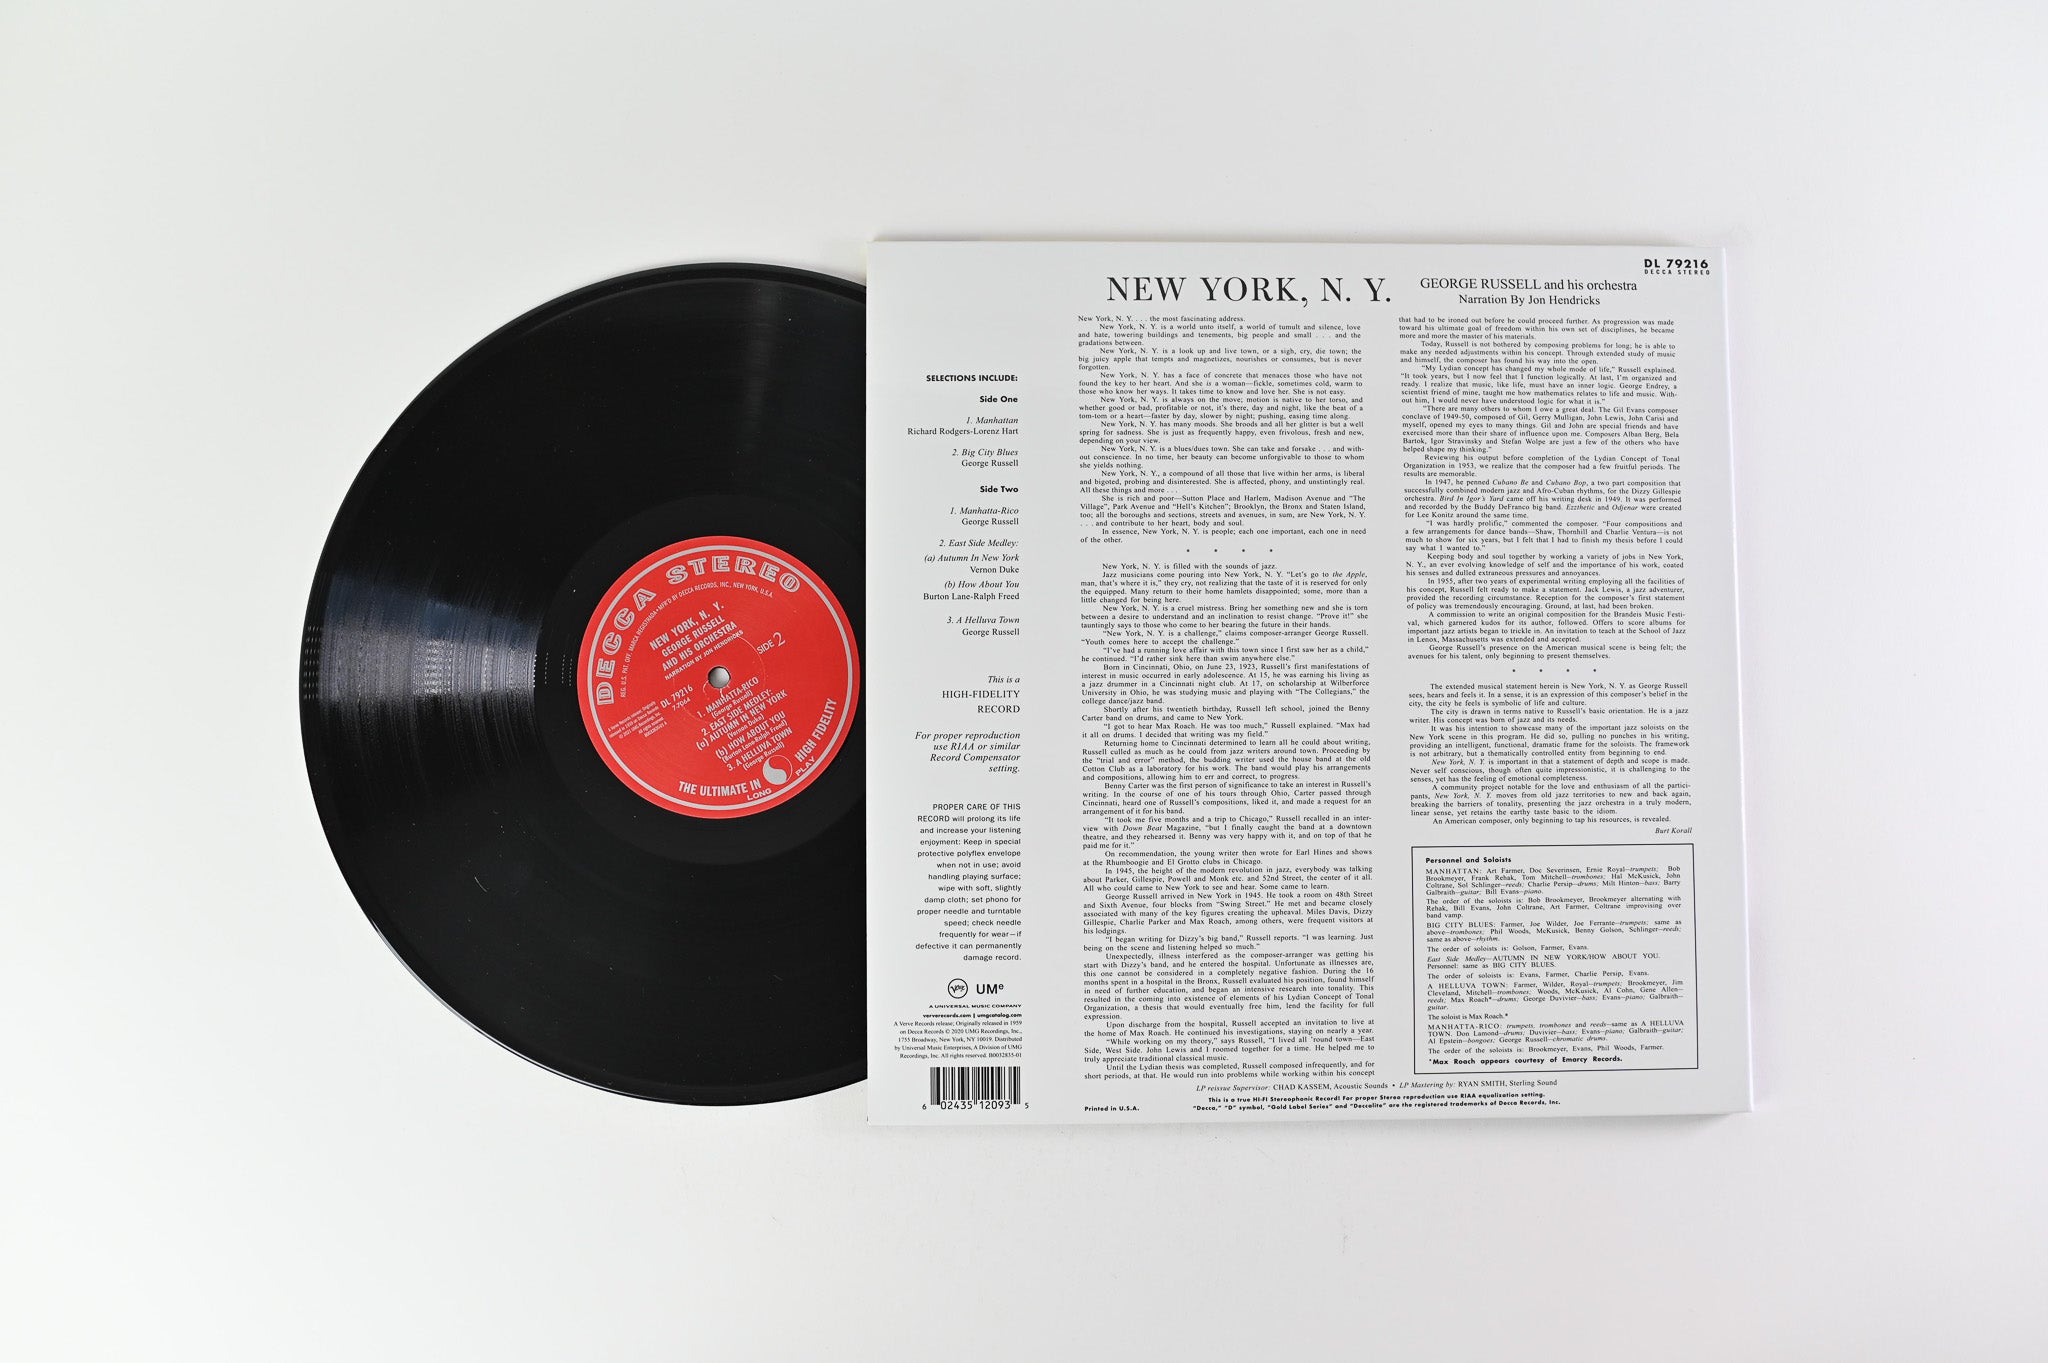 George Russell Orchestra - New York, N.Y. Reissue on Decca Acoustic Sounds Series